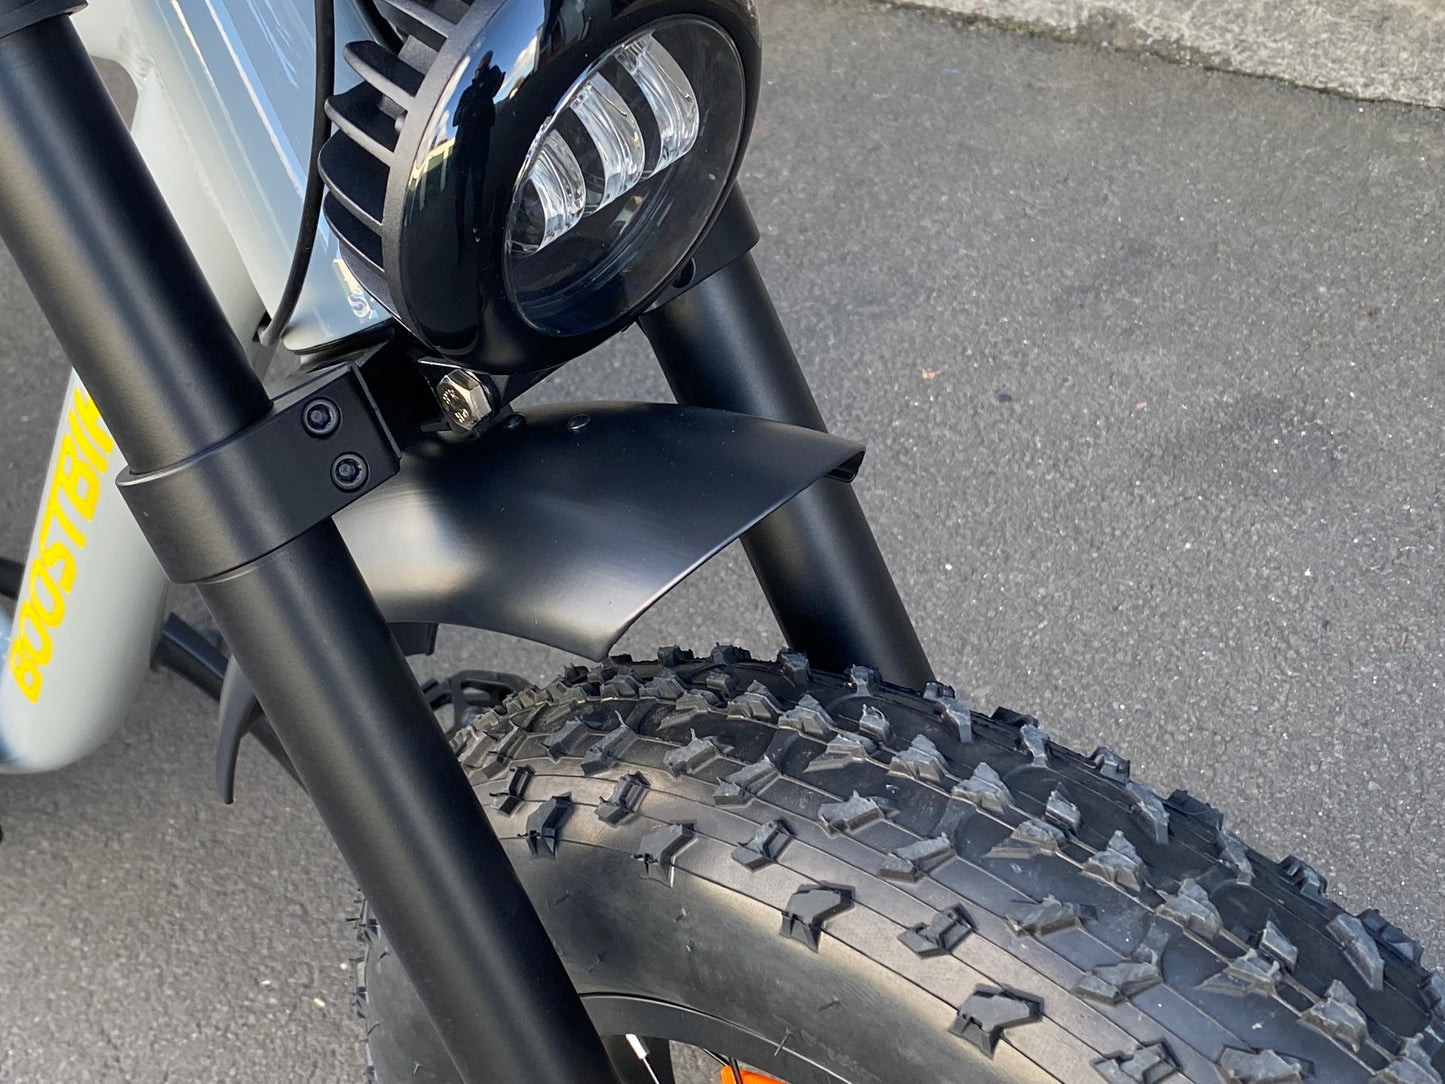 Electric Moped style in a 20" SUPER 73 fat tyre package. Apache from Boostbikes.